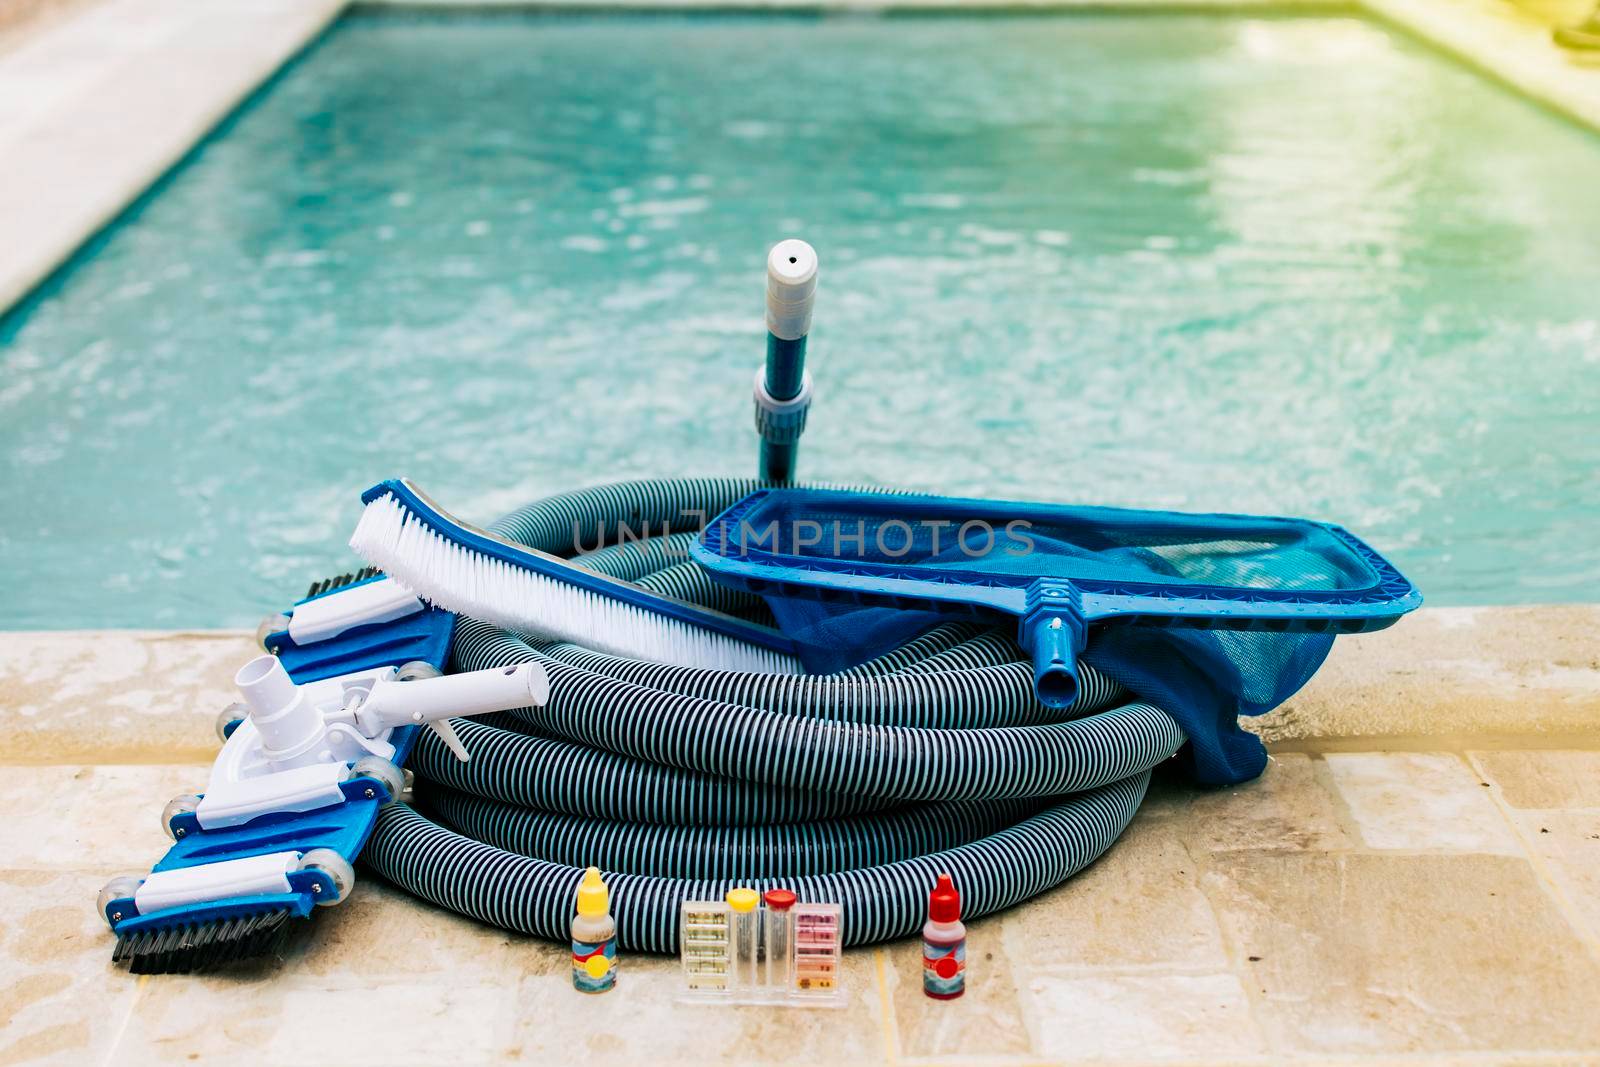 Pool cleaning and maintenance tools, image of pool cleaning and maintenance kit, vacuum cleaner, ph test, leaf picker and pool sweeper